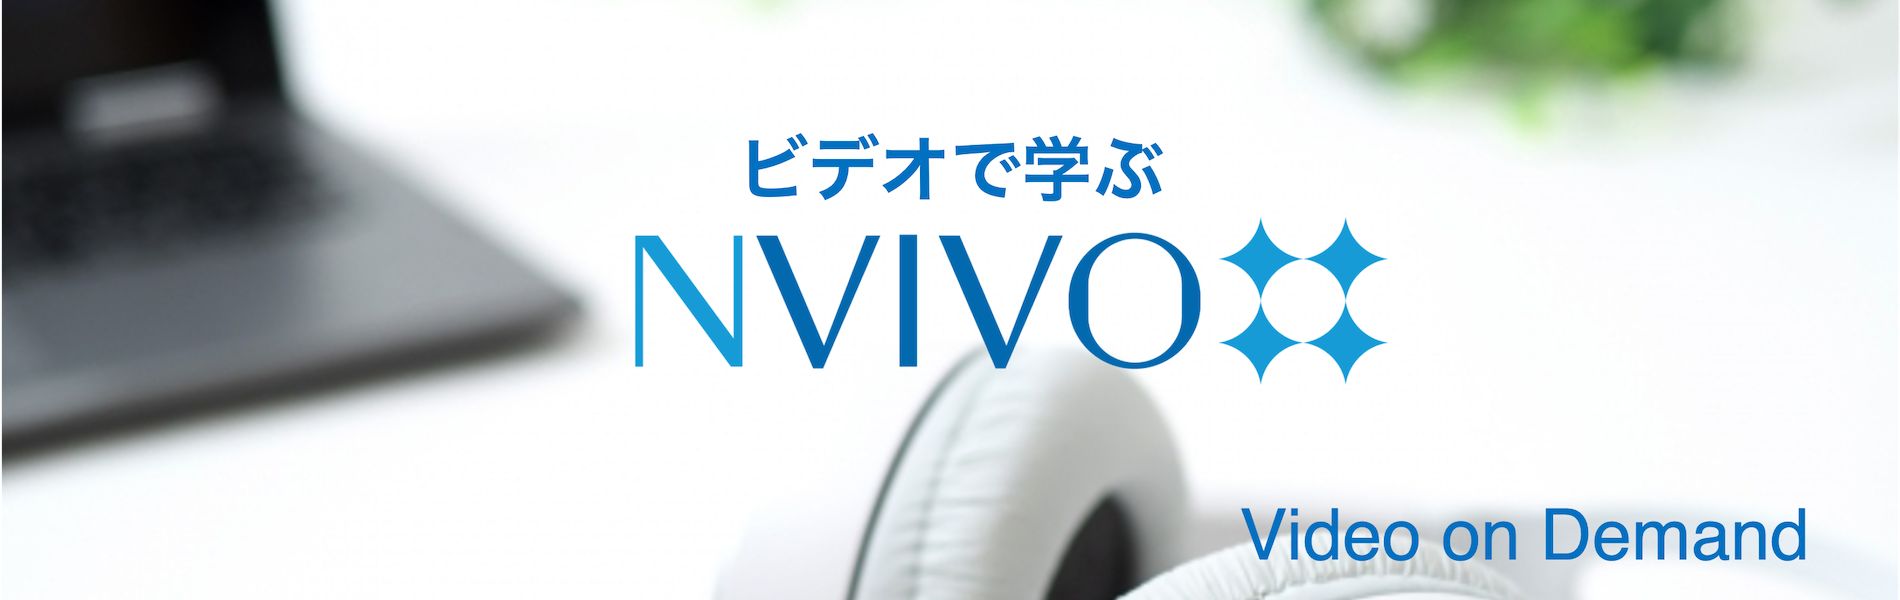 Video on Demand - Introduction to NVivo